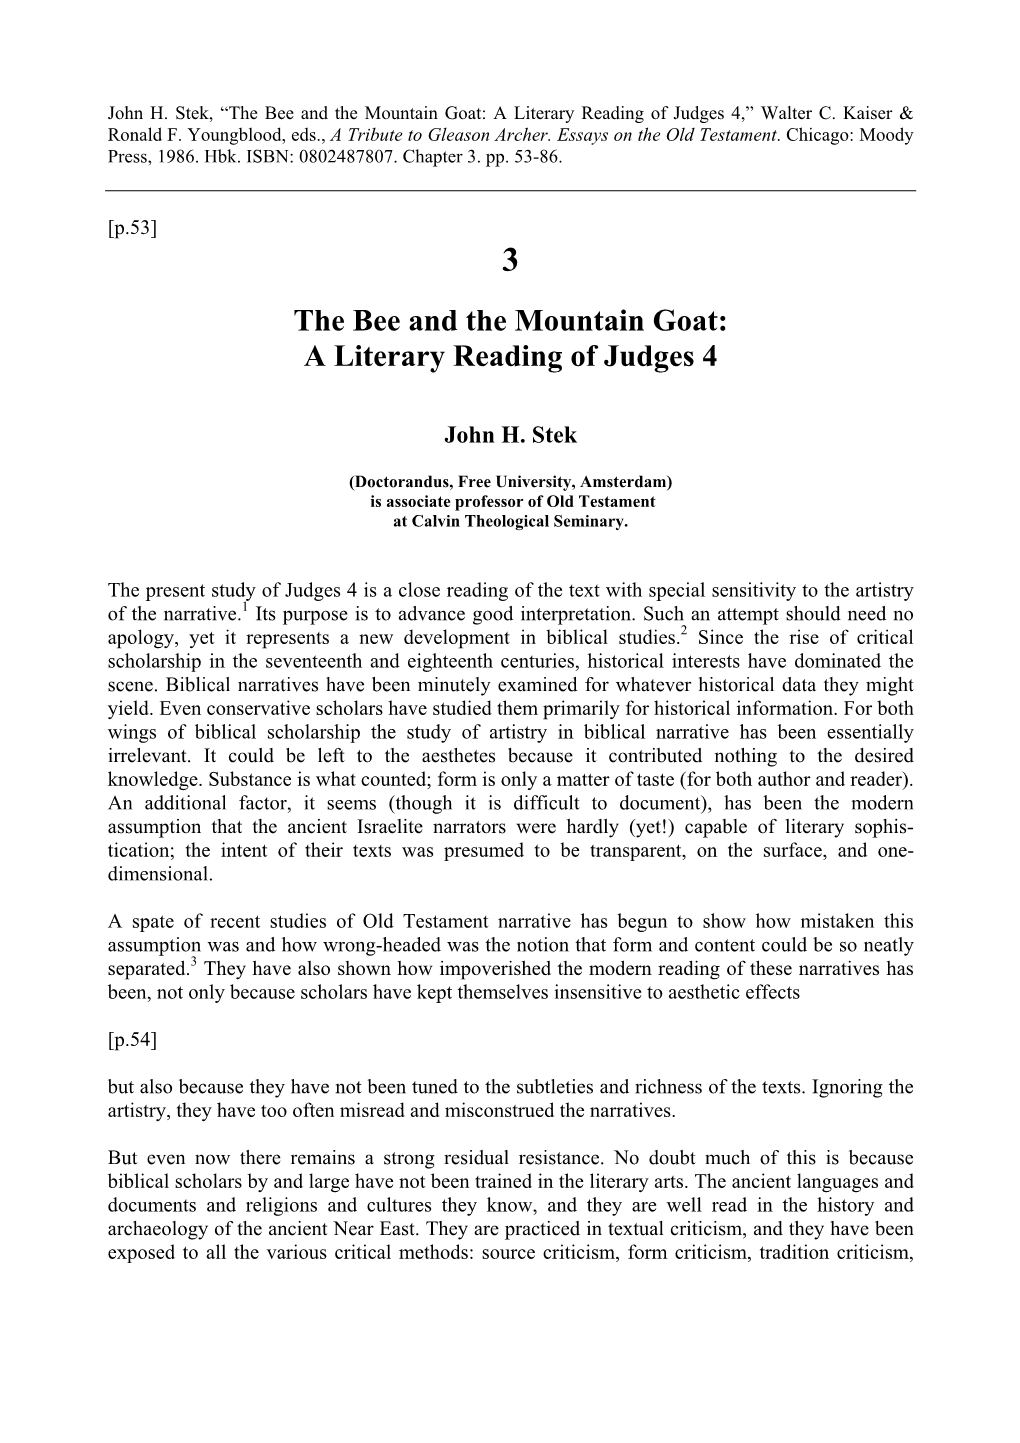 The Bee and the Mountain Goat: a Literary Reading of Judges 4,” Walter C